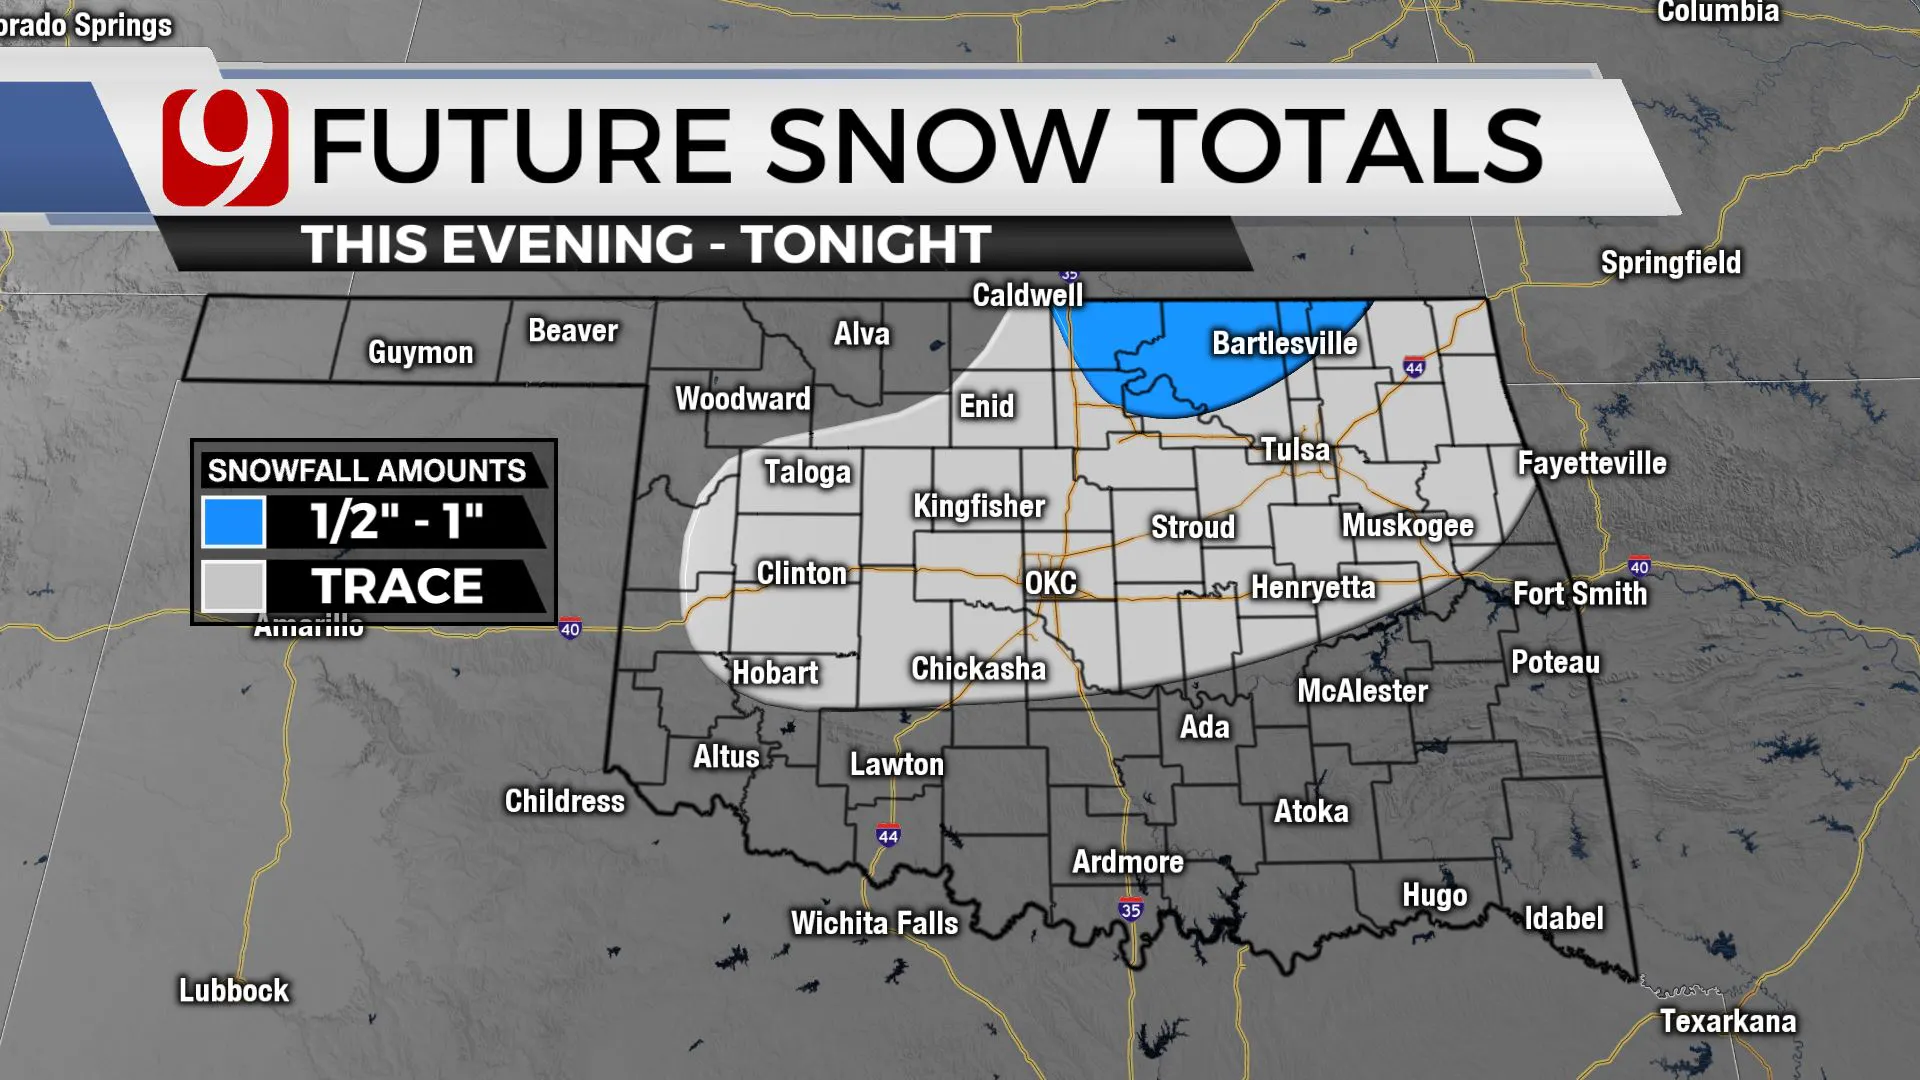 Future snow totals for Wednesday night.